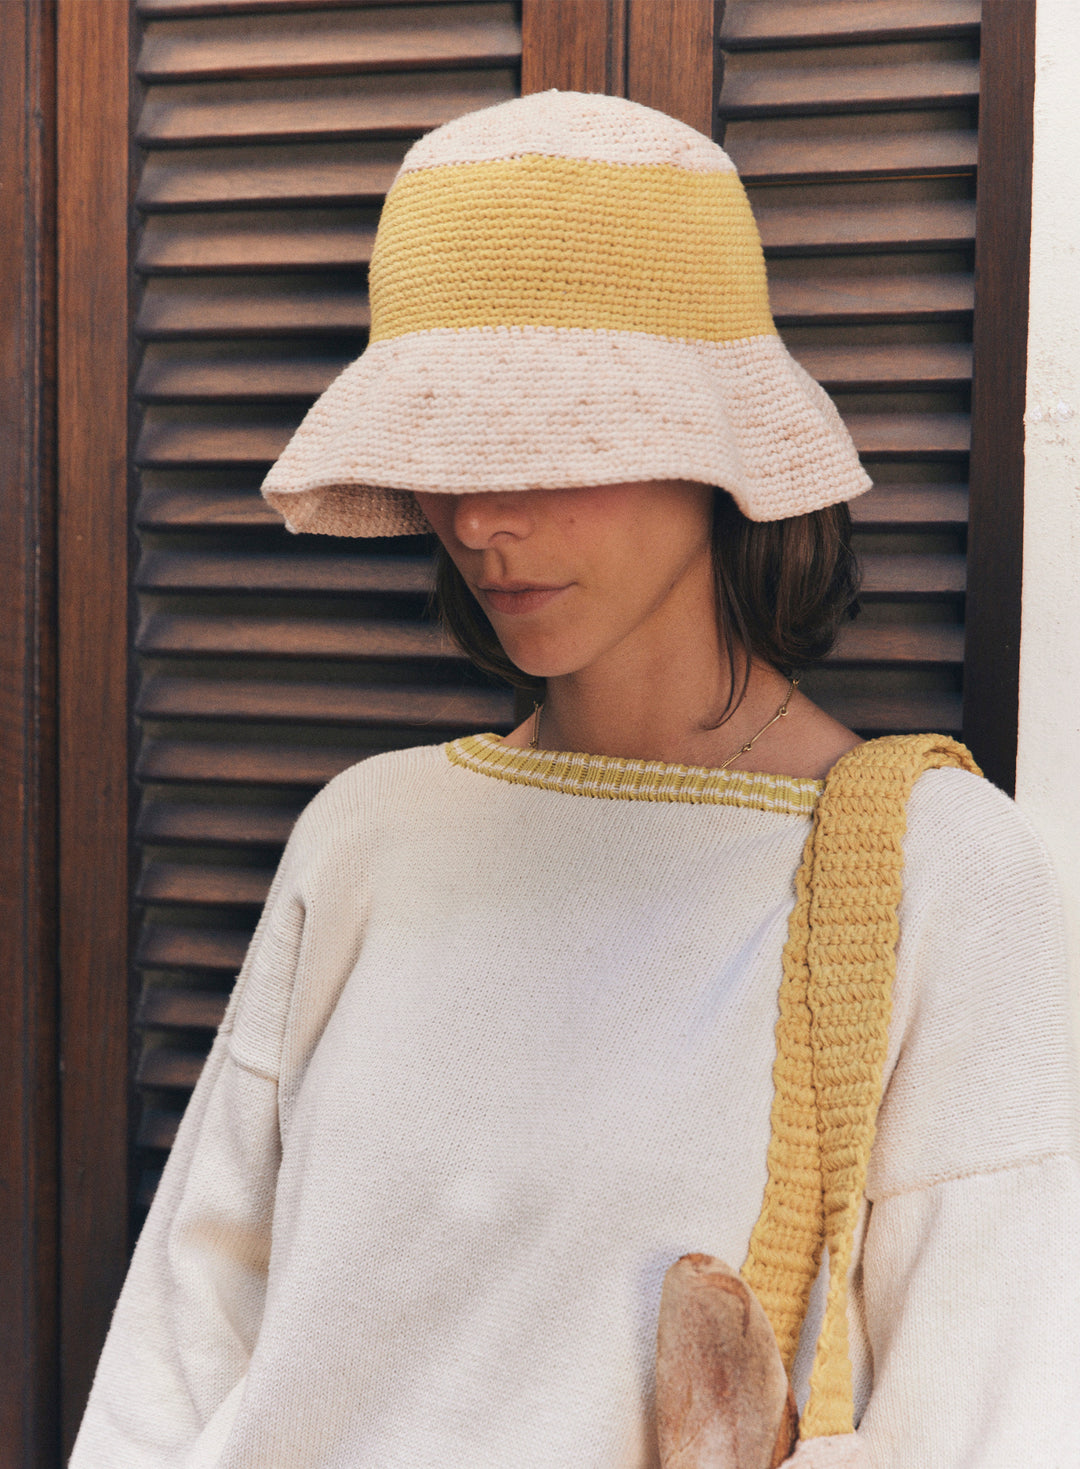 Undyed and Yellow Knit Crewneck Pullover